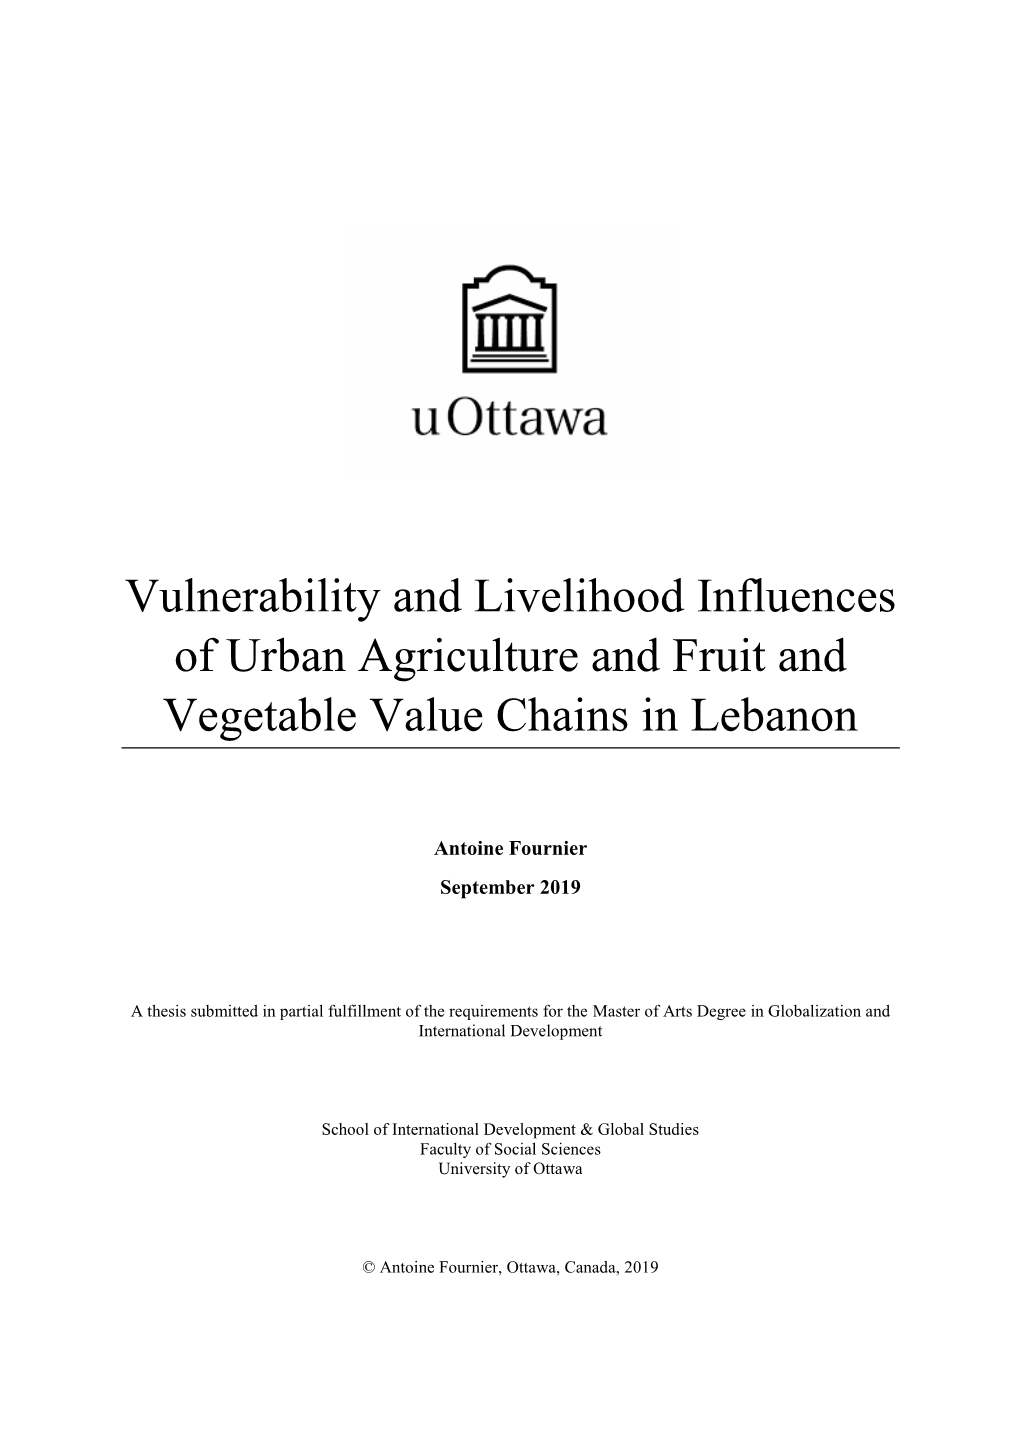 Vulnerability And Livelihood Influences Of Urban Agriculture And Fruit And Vegetable Value